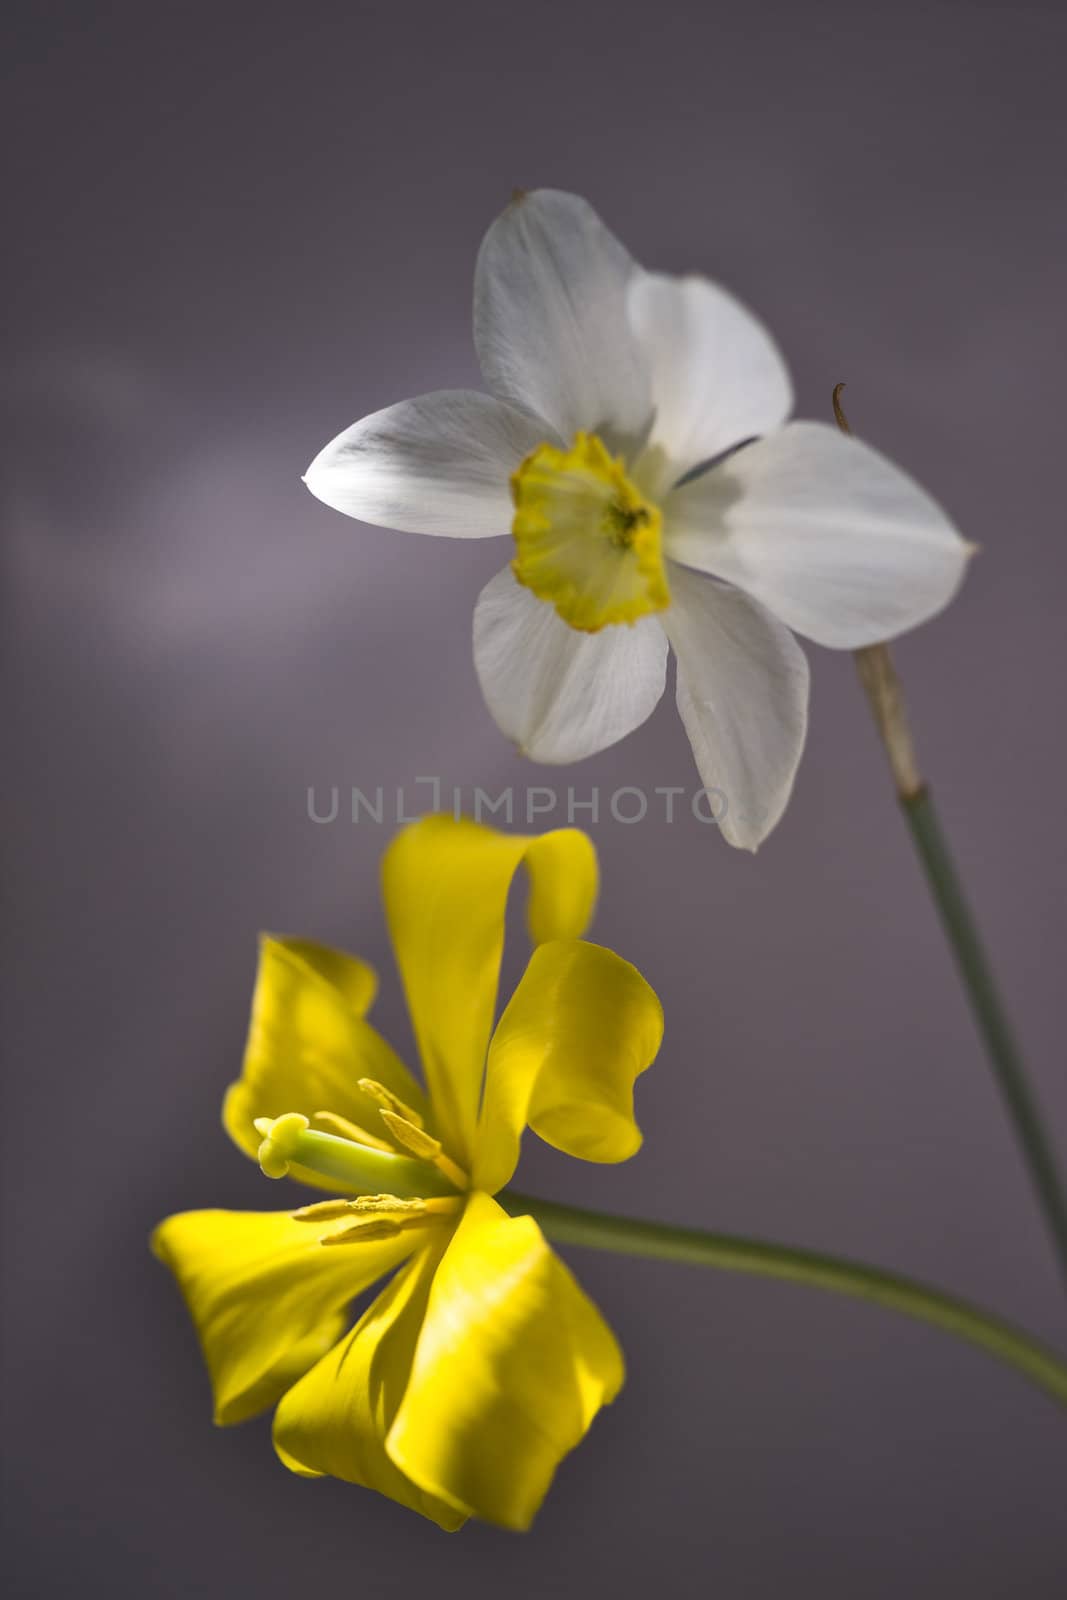 Yellow tulip in focus and white narcissus 